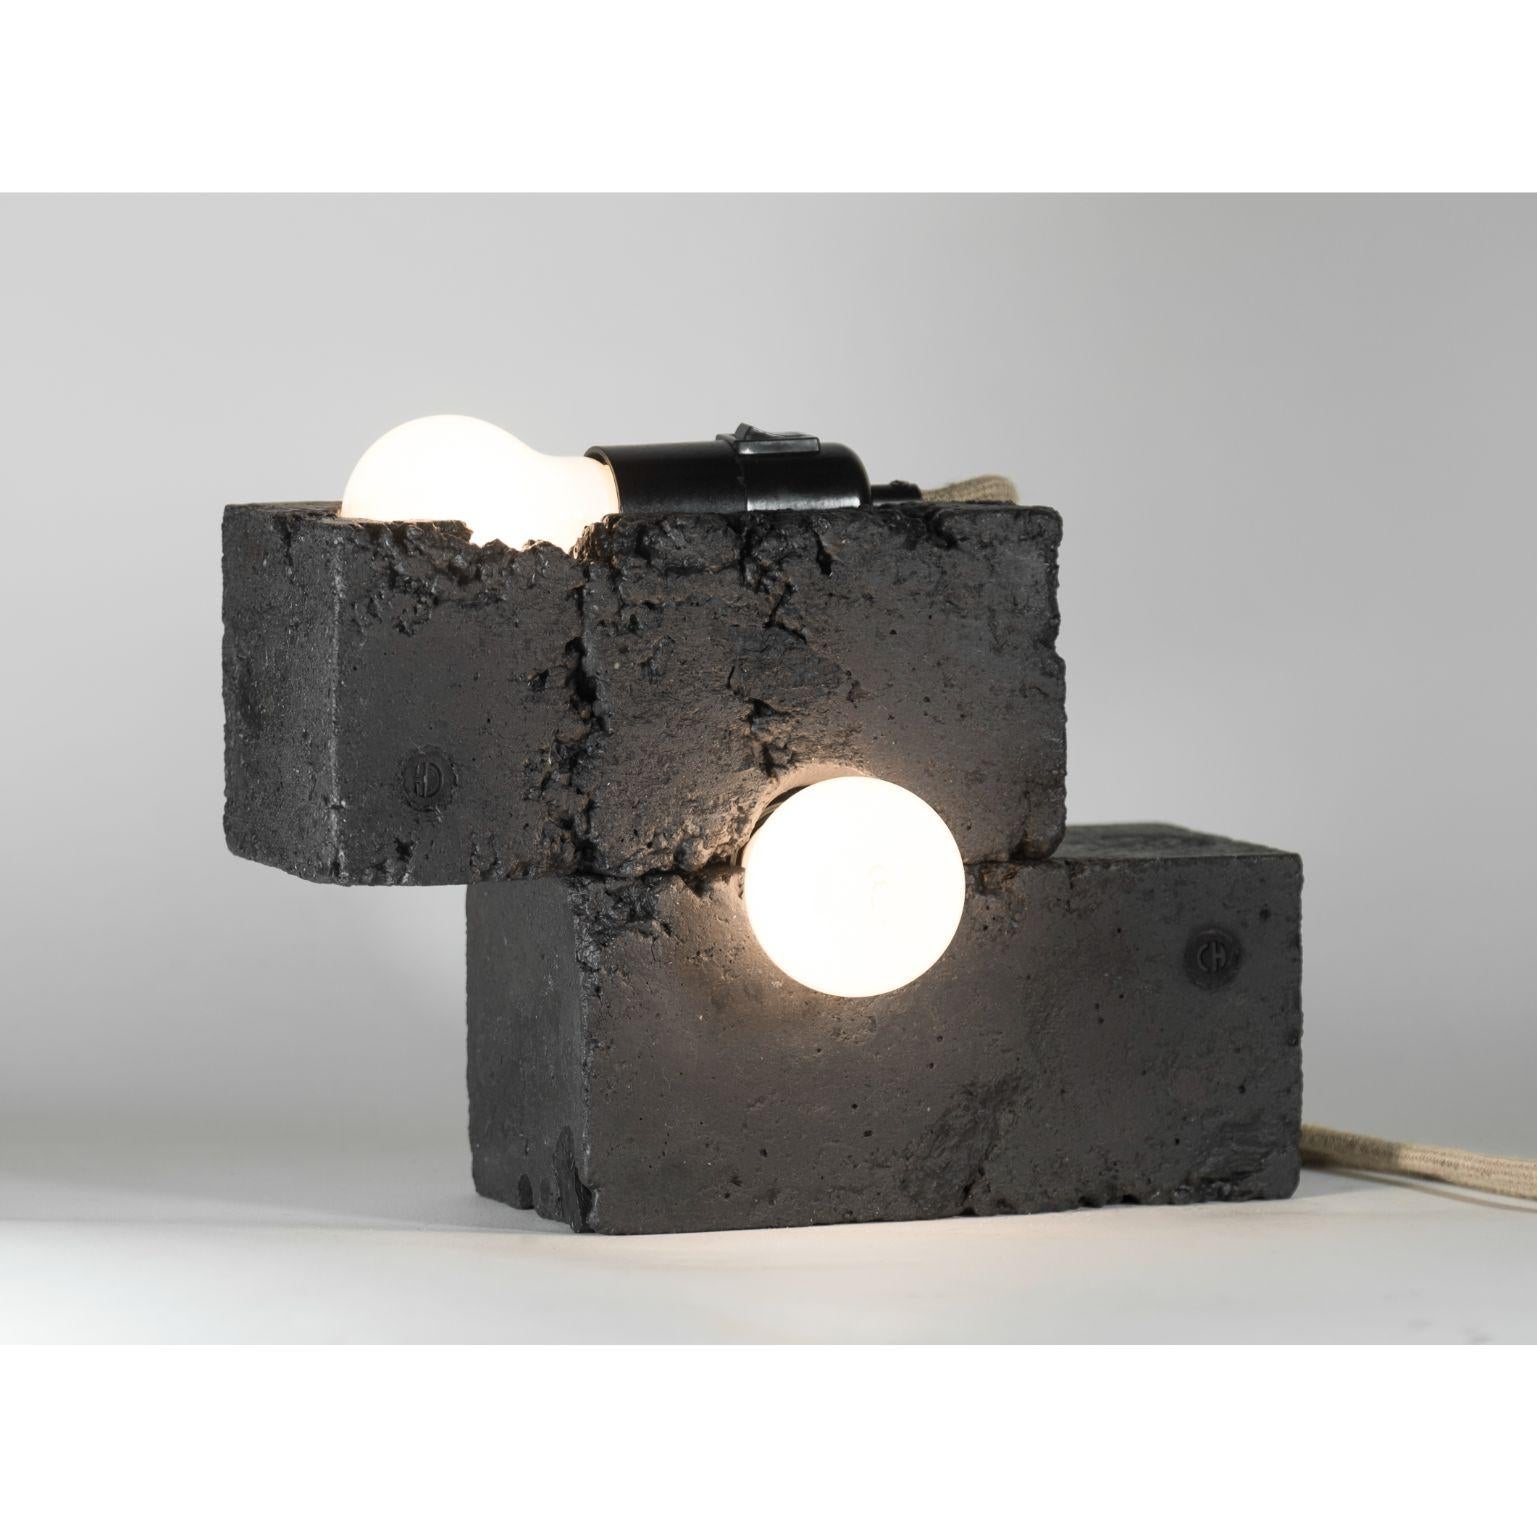 Set of 2 Cofit 20's pendant light by Atelier Haute Cuisine
Dimensions: 10 x 10 x 22 cm 
Materials: Concrete

All our lamps can be wired according to each country. If sold to the USA it will be wired for the USA for instance.
 
The design wears the